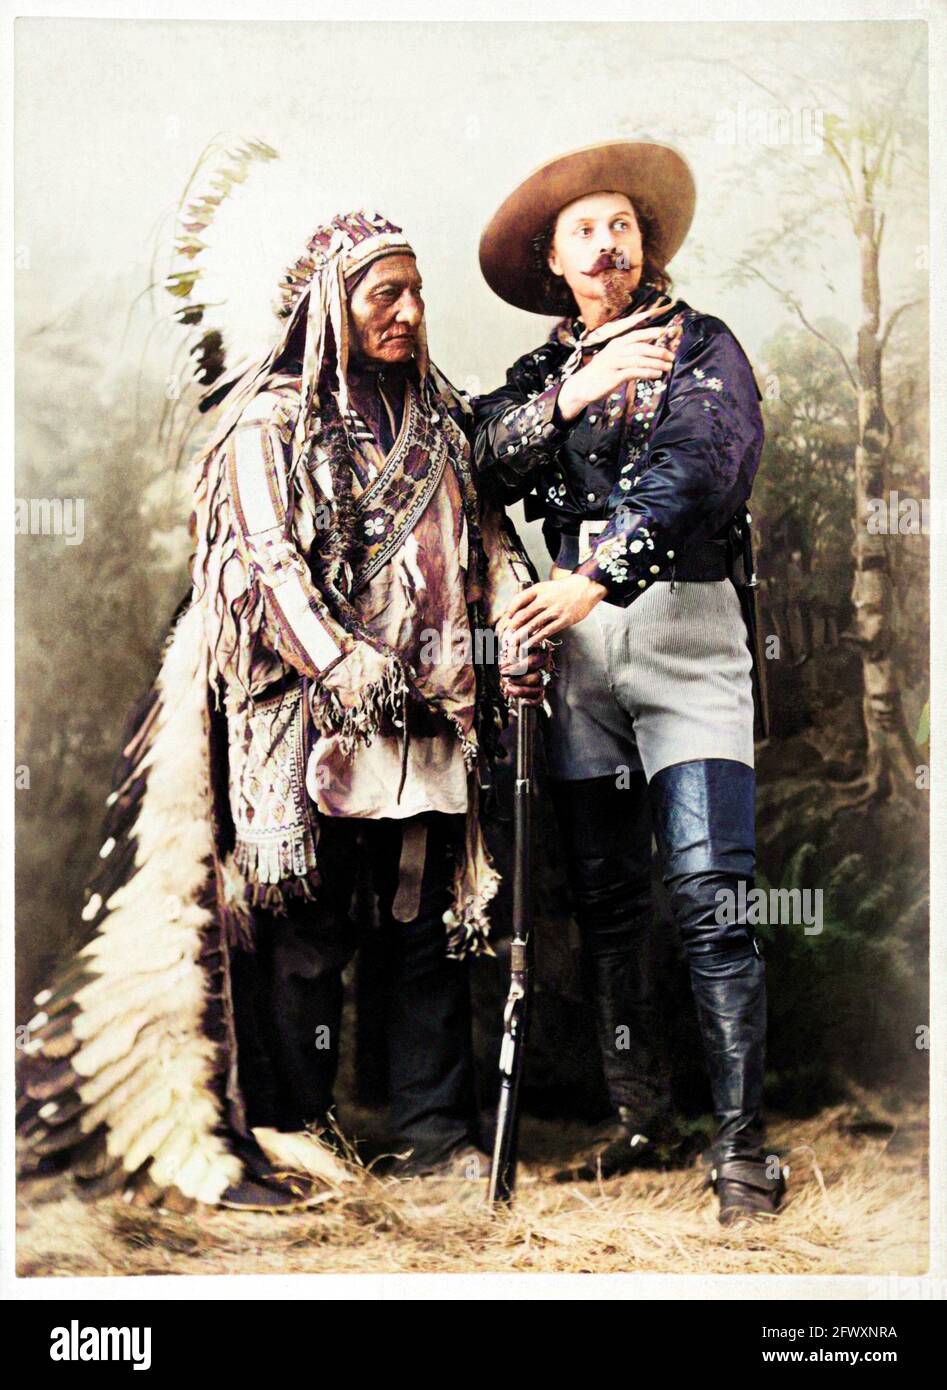 1880 ca , Montreal , CANADA : The celebrated Colonel William Frederick CODY , know as BUFFALO BILL ( 1846 - 1917 ) with Chef SITTING BULL ( 1831 - 1890 ) of Sioux Hunkpapa at  time of WILD WEST SHOW . Photo by W.M. Notman & Son , Montreal . DIGITALLY COLORIZED . - Epopea del Selvaggio WEST - cowboy - cow-boy  -  Circus - uomo anziano vecchio - older man  - baffi - barba - beard - moustache - Circo - hat - cappello - piume - feathers - Indians of America - Indiani d'America - Native Americans - Nativi americani - Pellerossa - Redskins - fucile - rifle - gun - arma - boots - stivali --- Archivio Stock Photo